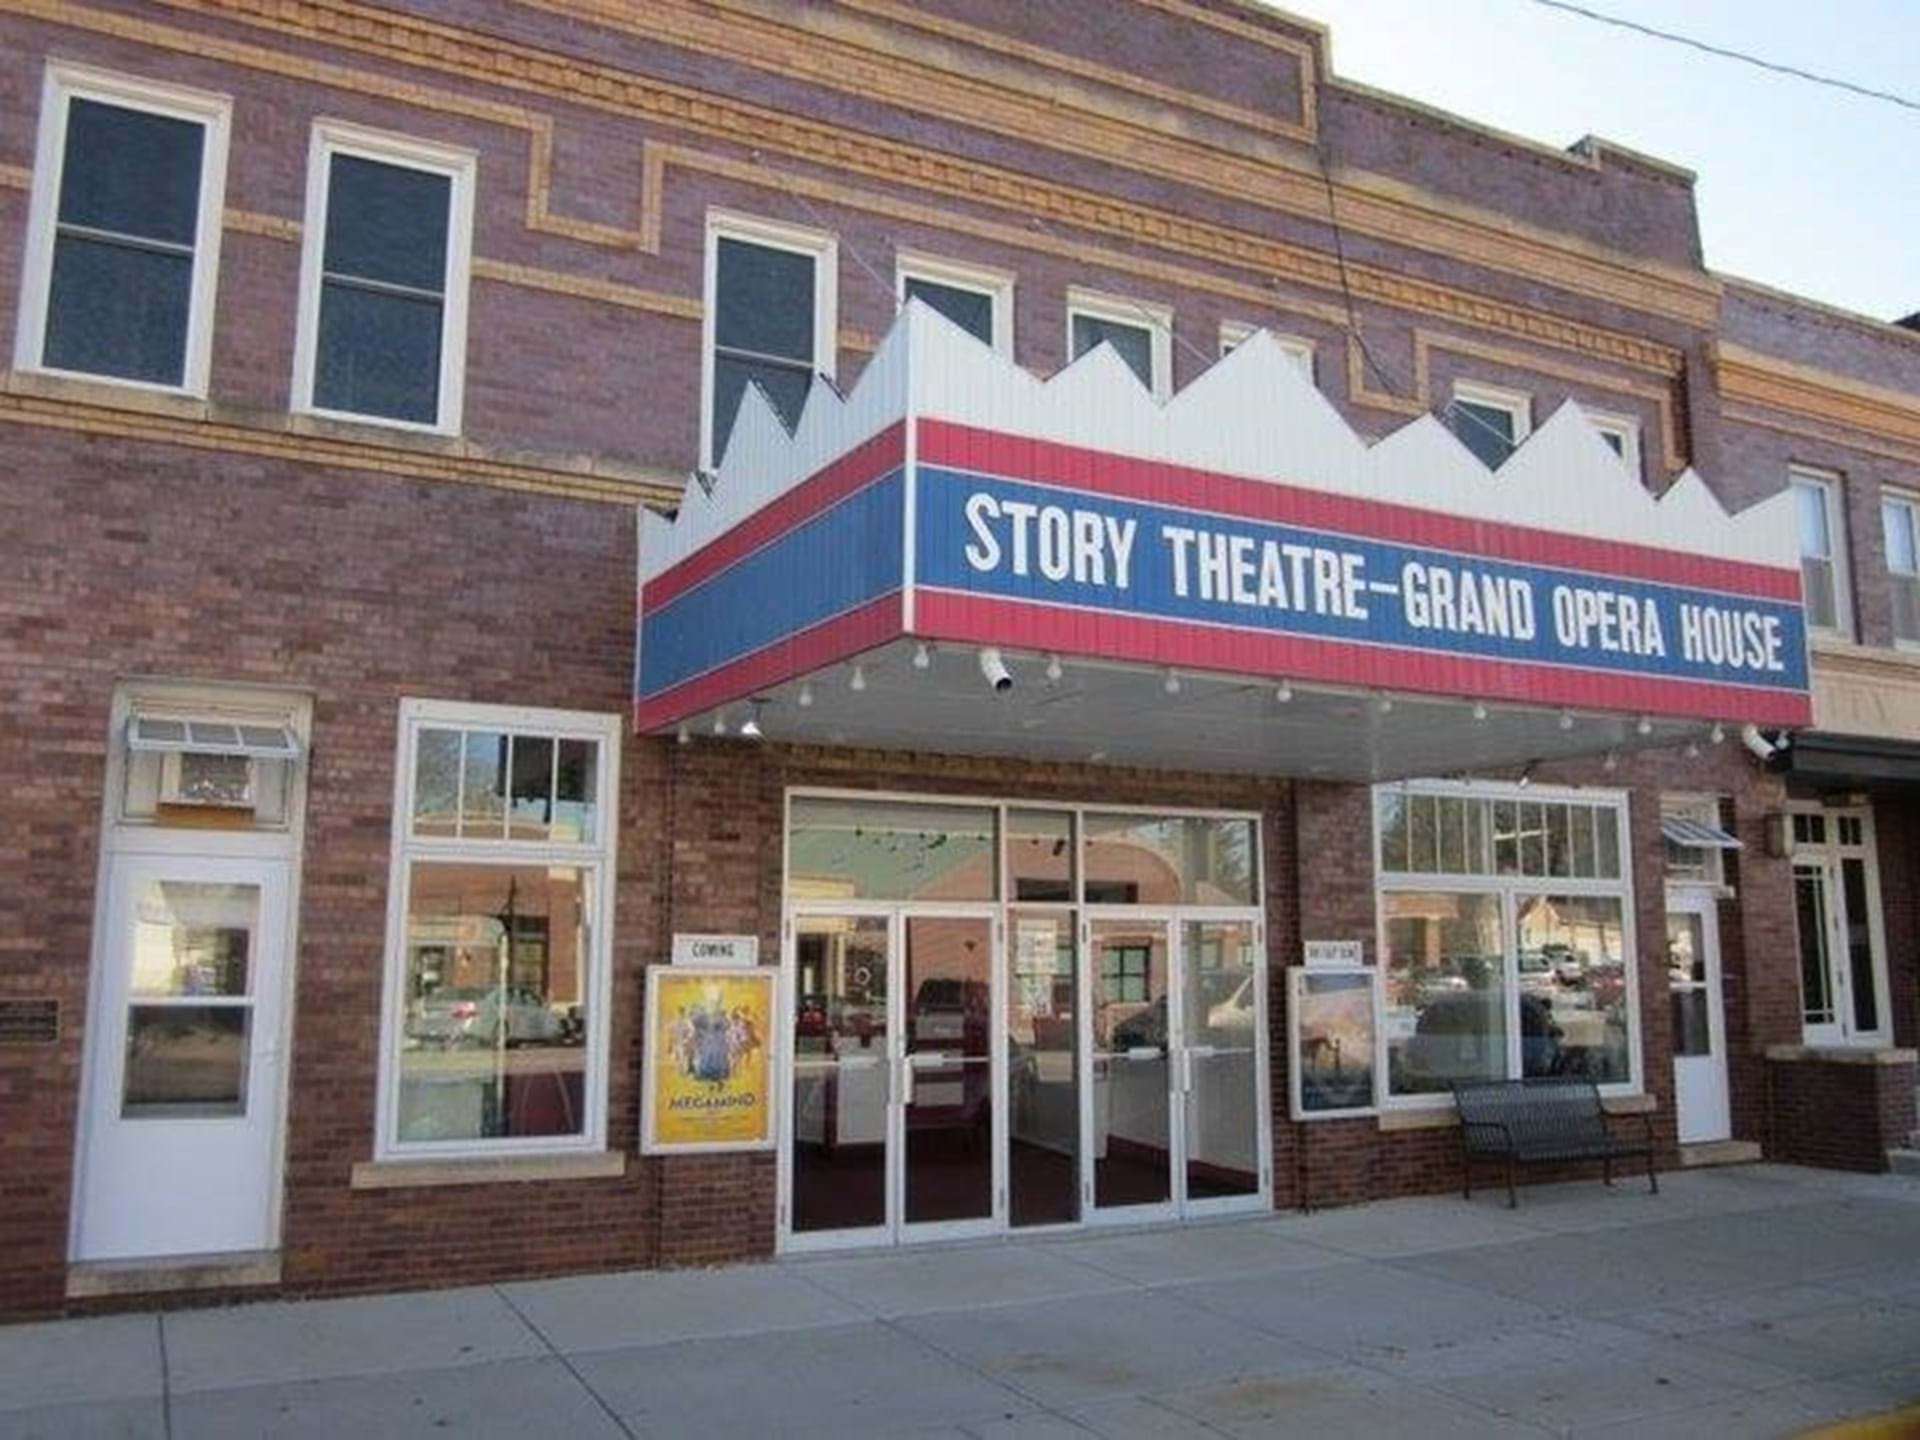 The Story Theater Grand Opera House was built in 1913